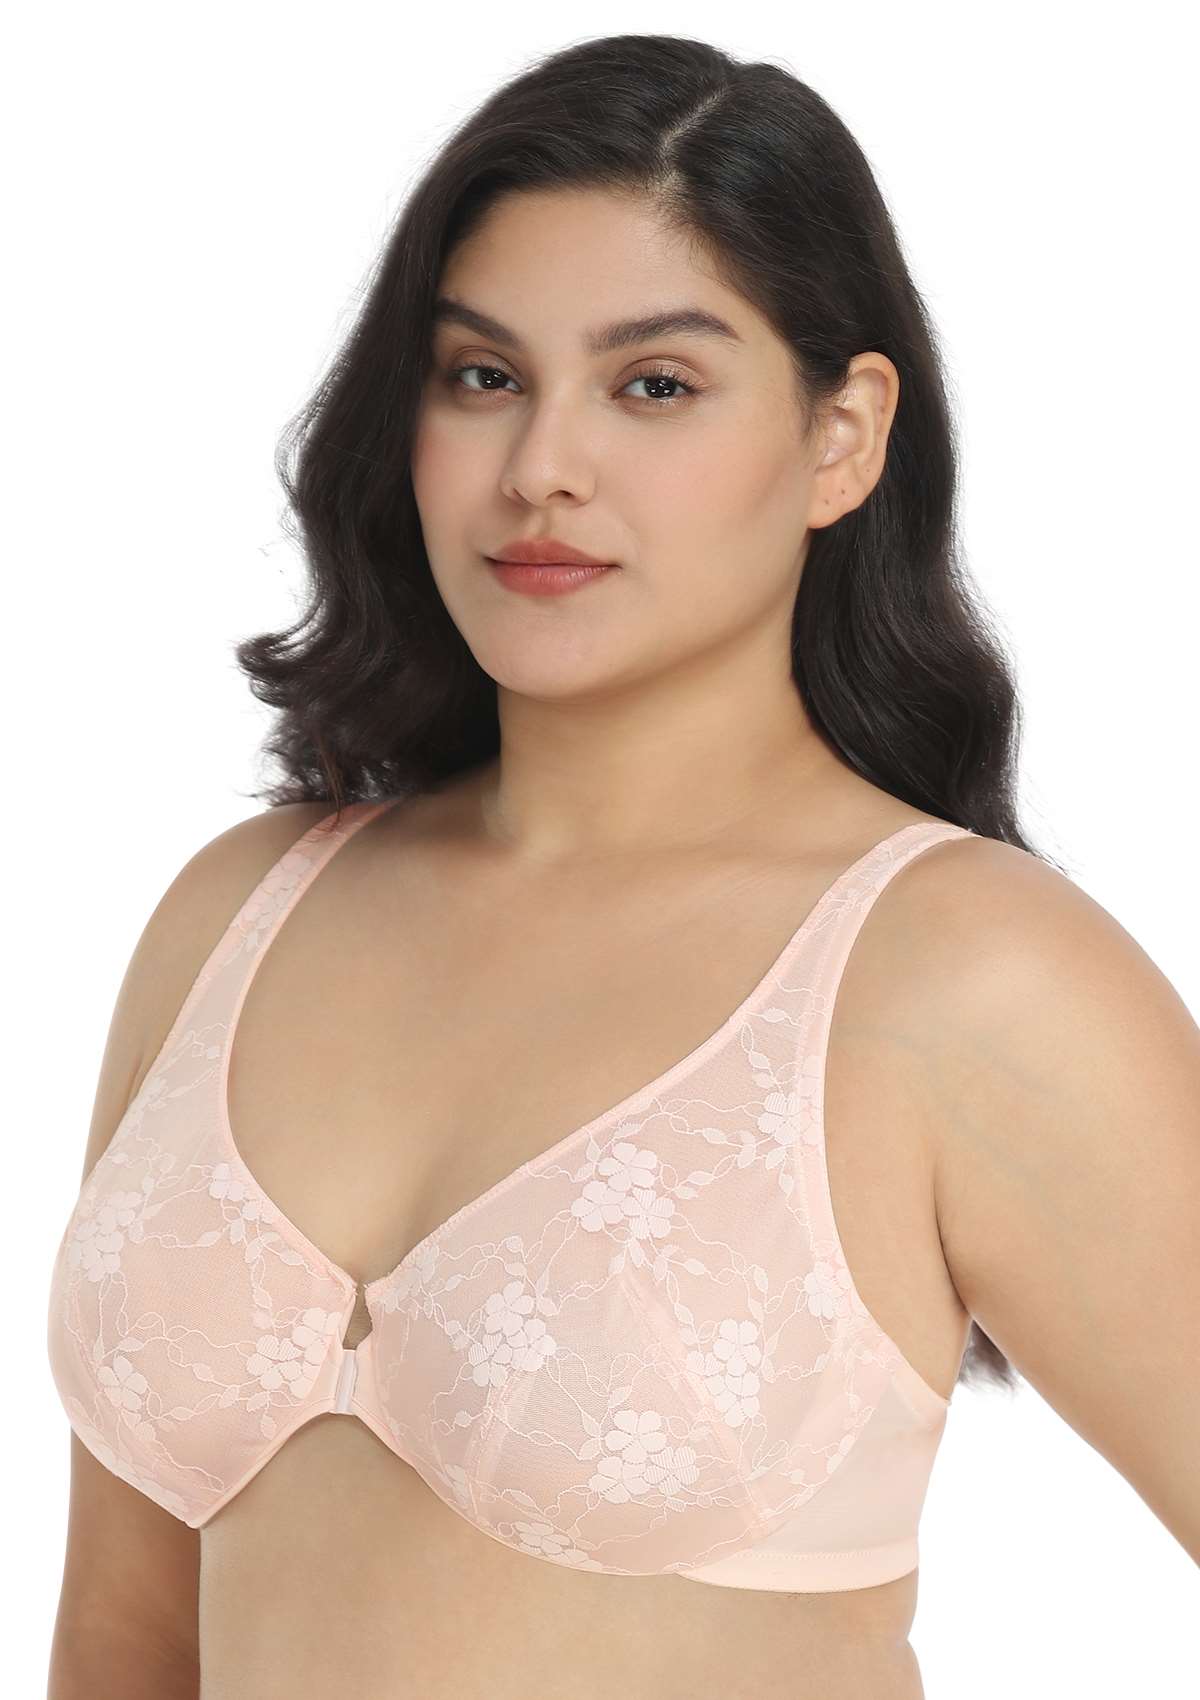 HSIA Spring Romance Front-Close Floral Lace Unlined Full Coverage Bra - White / 36 / G